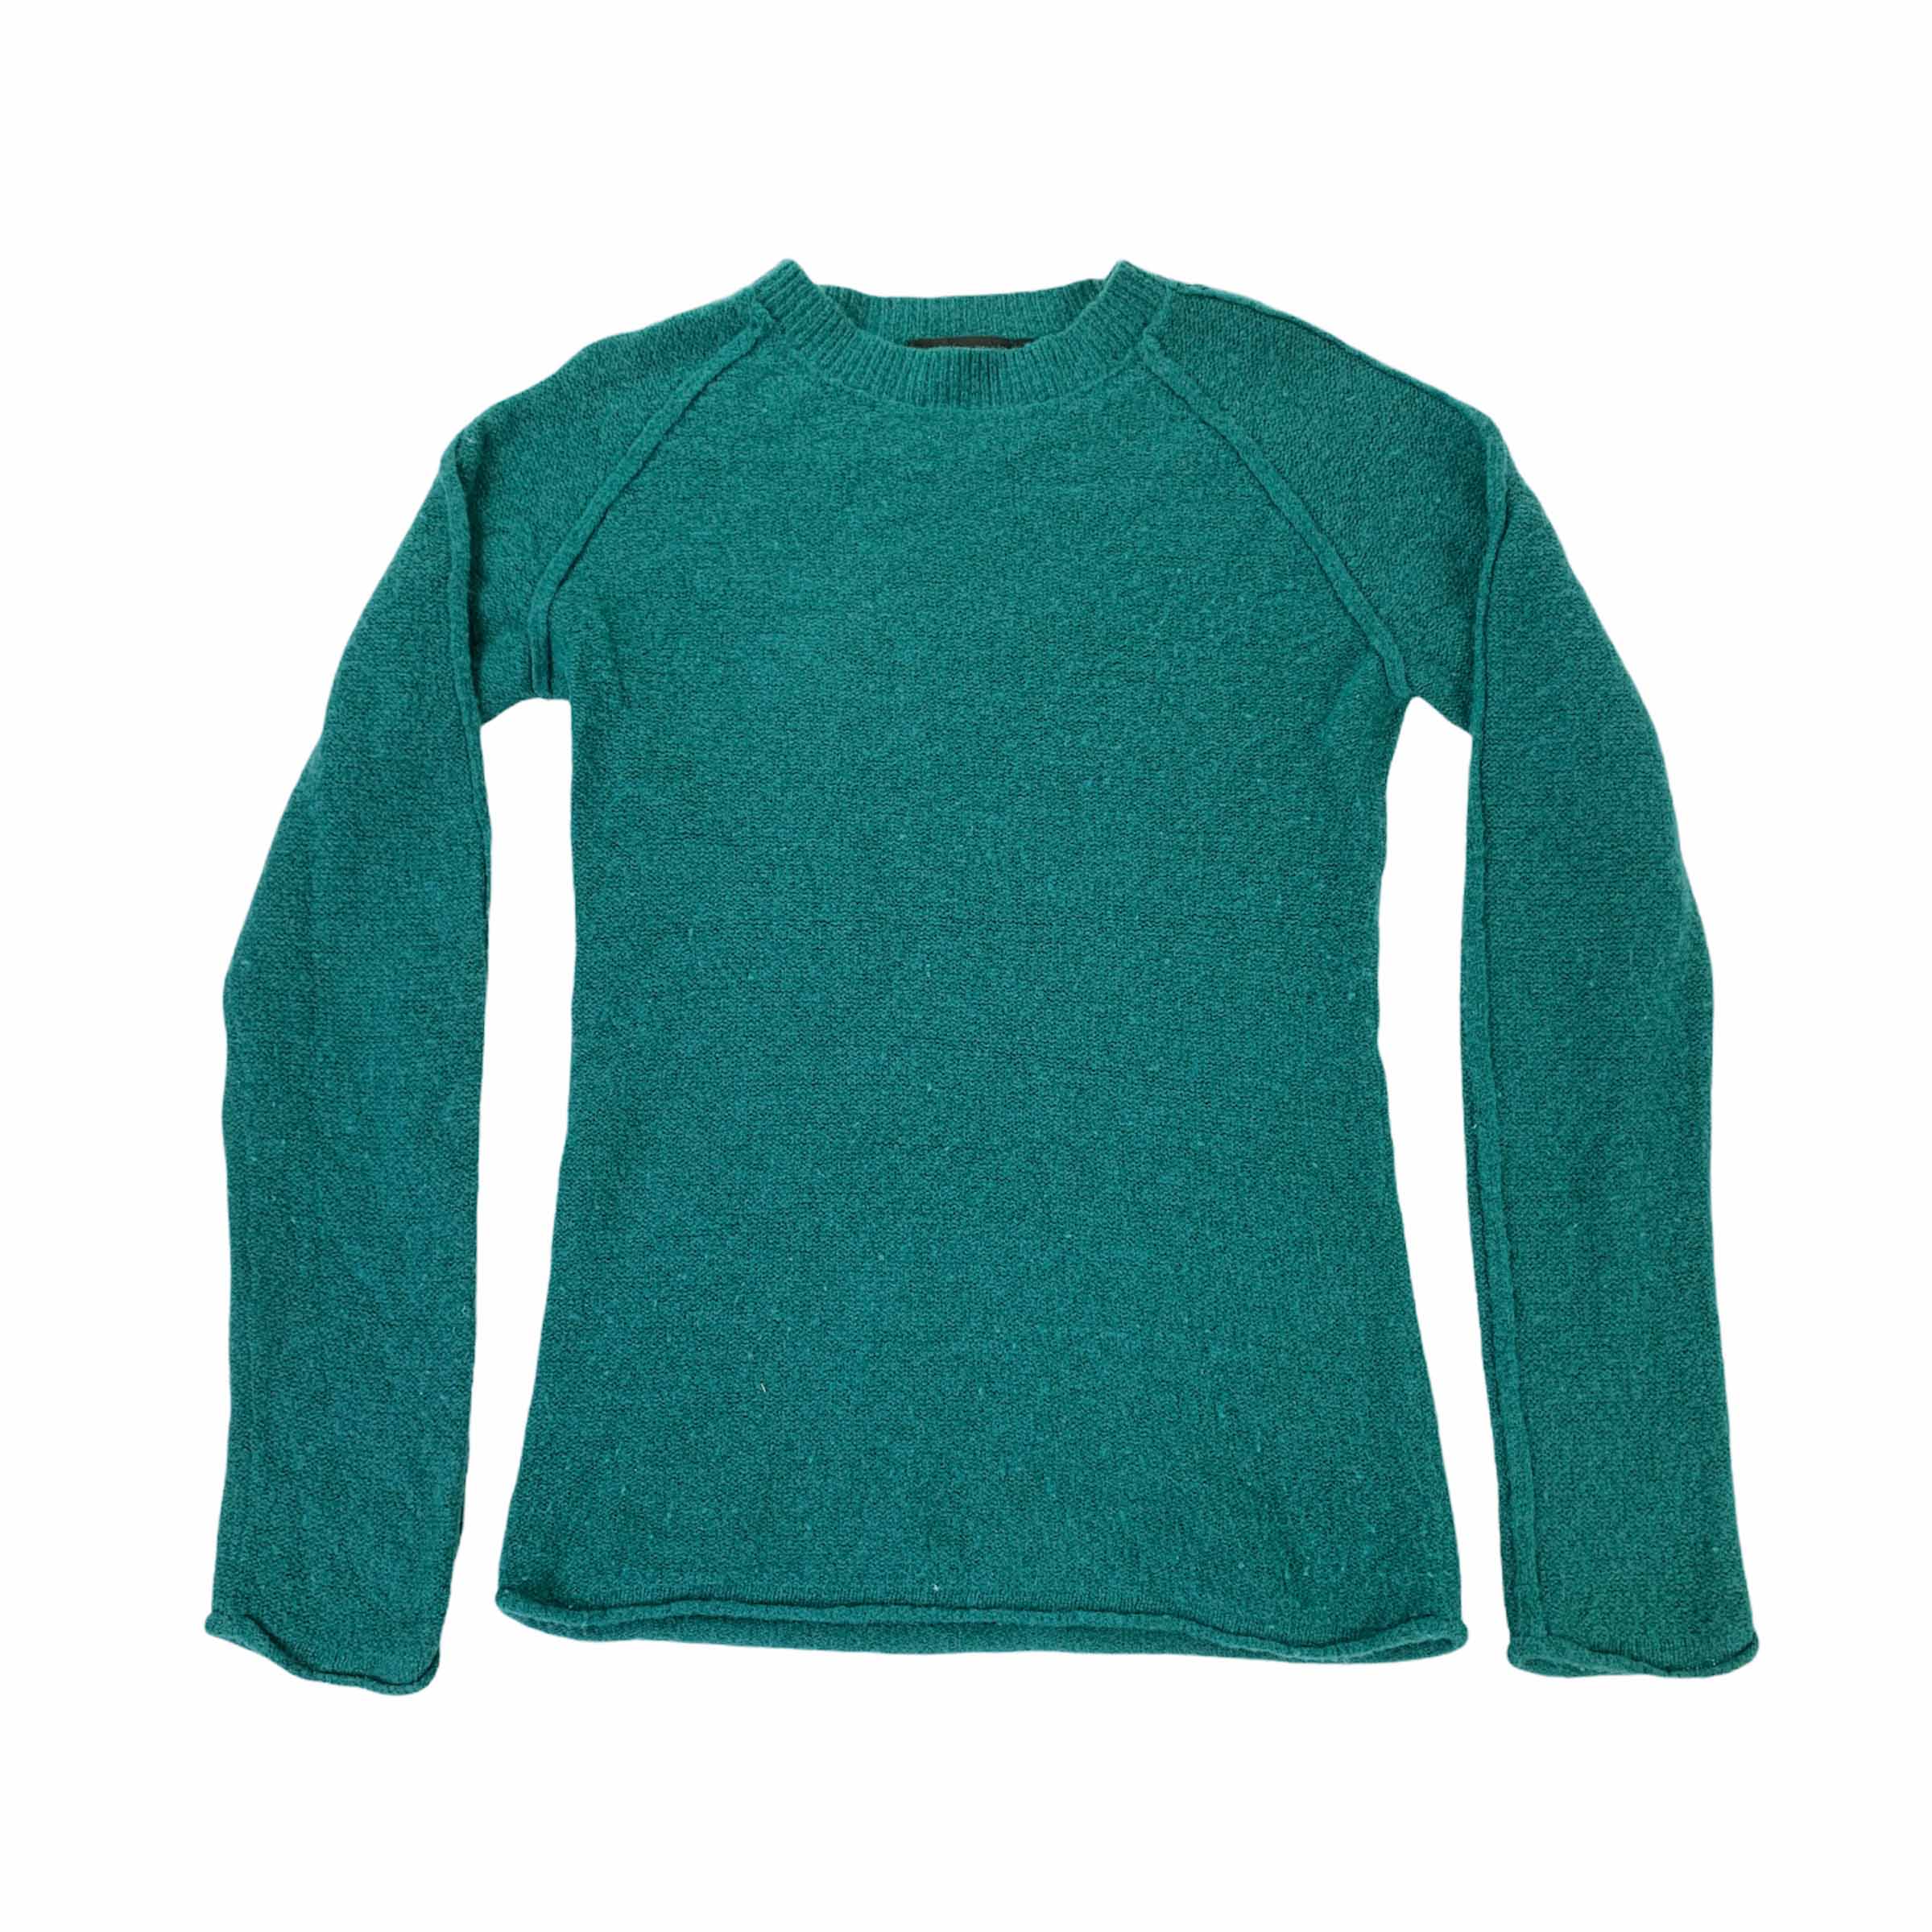 [Christophe Lemaire] Lambswool Blue Green Knit - Size 1